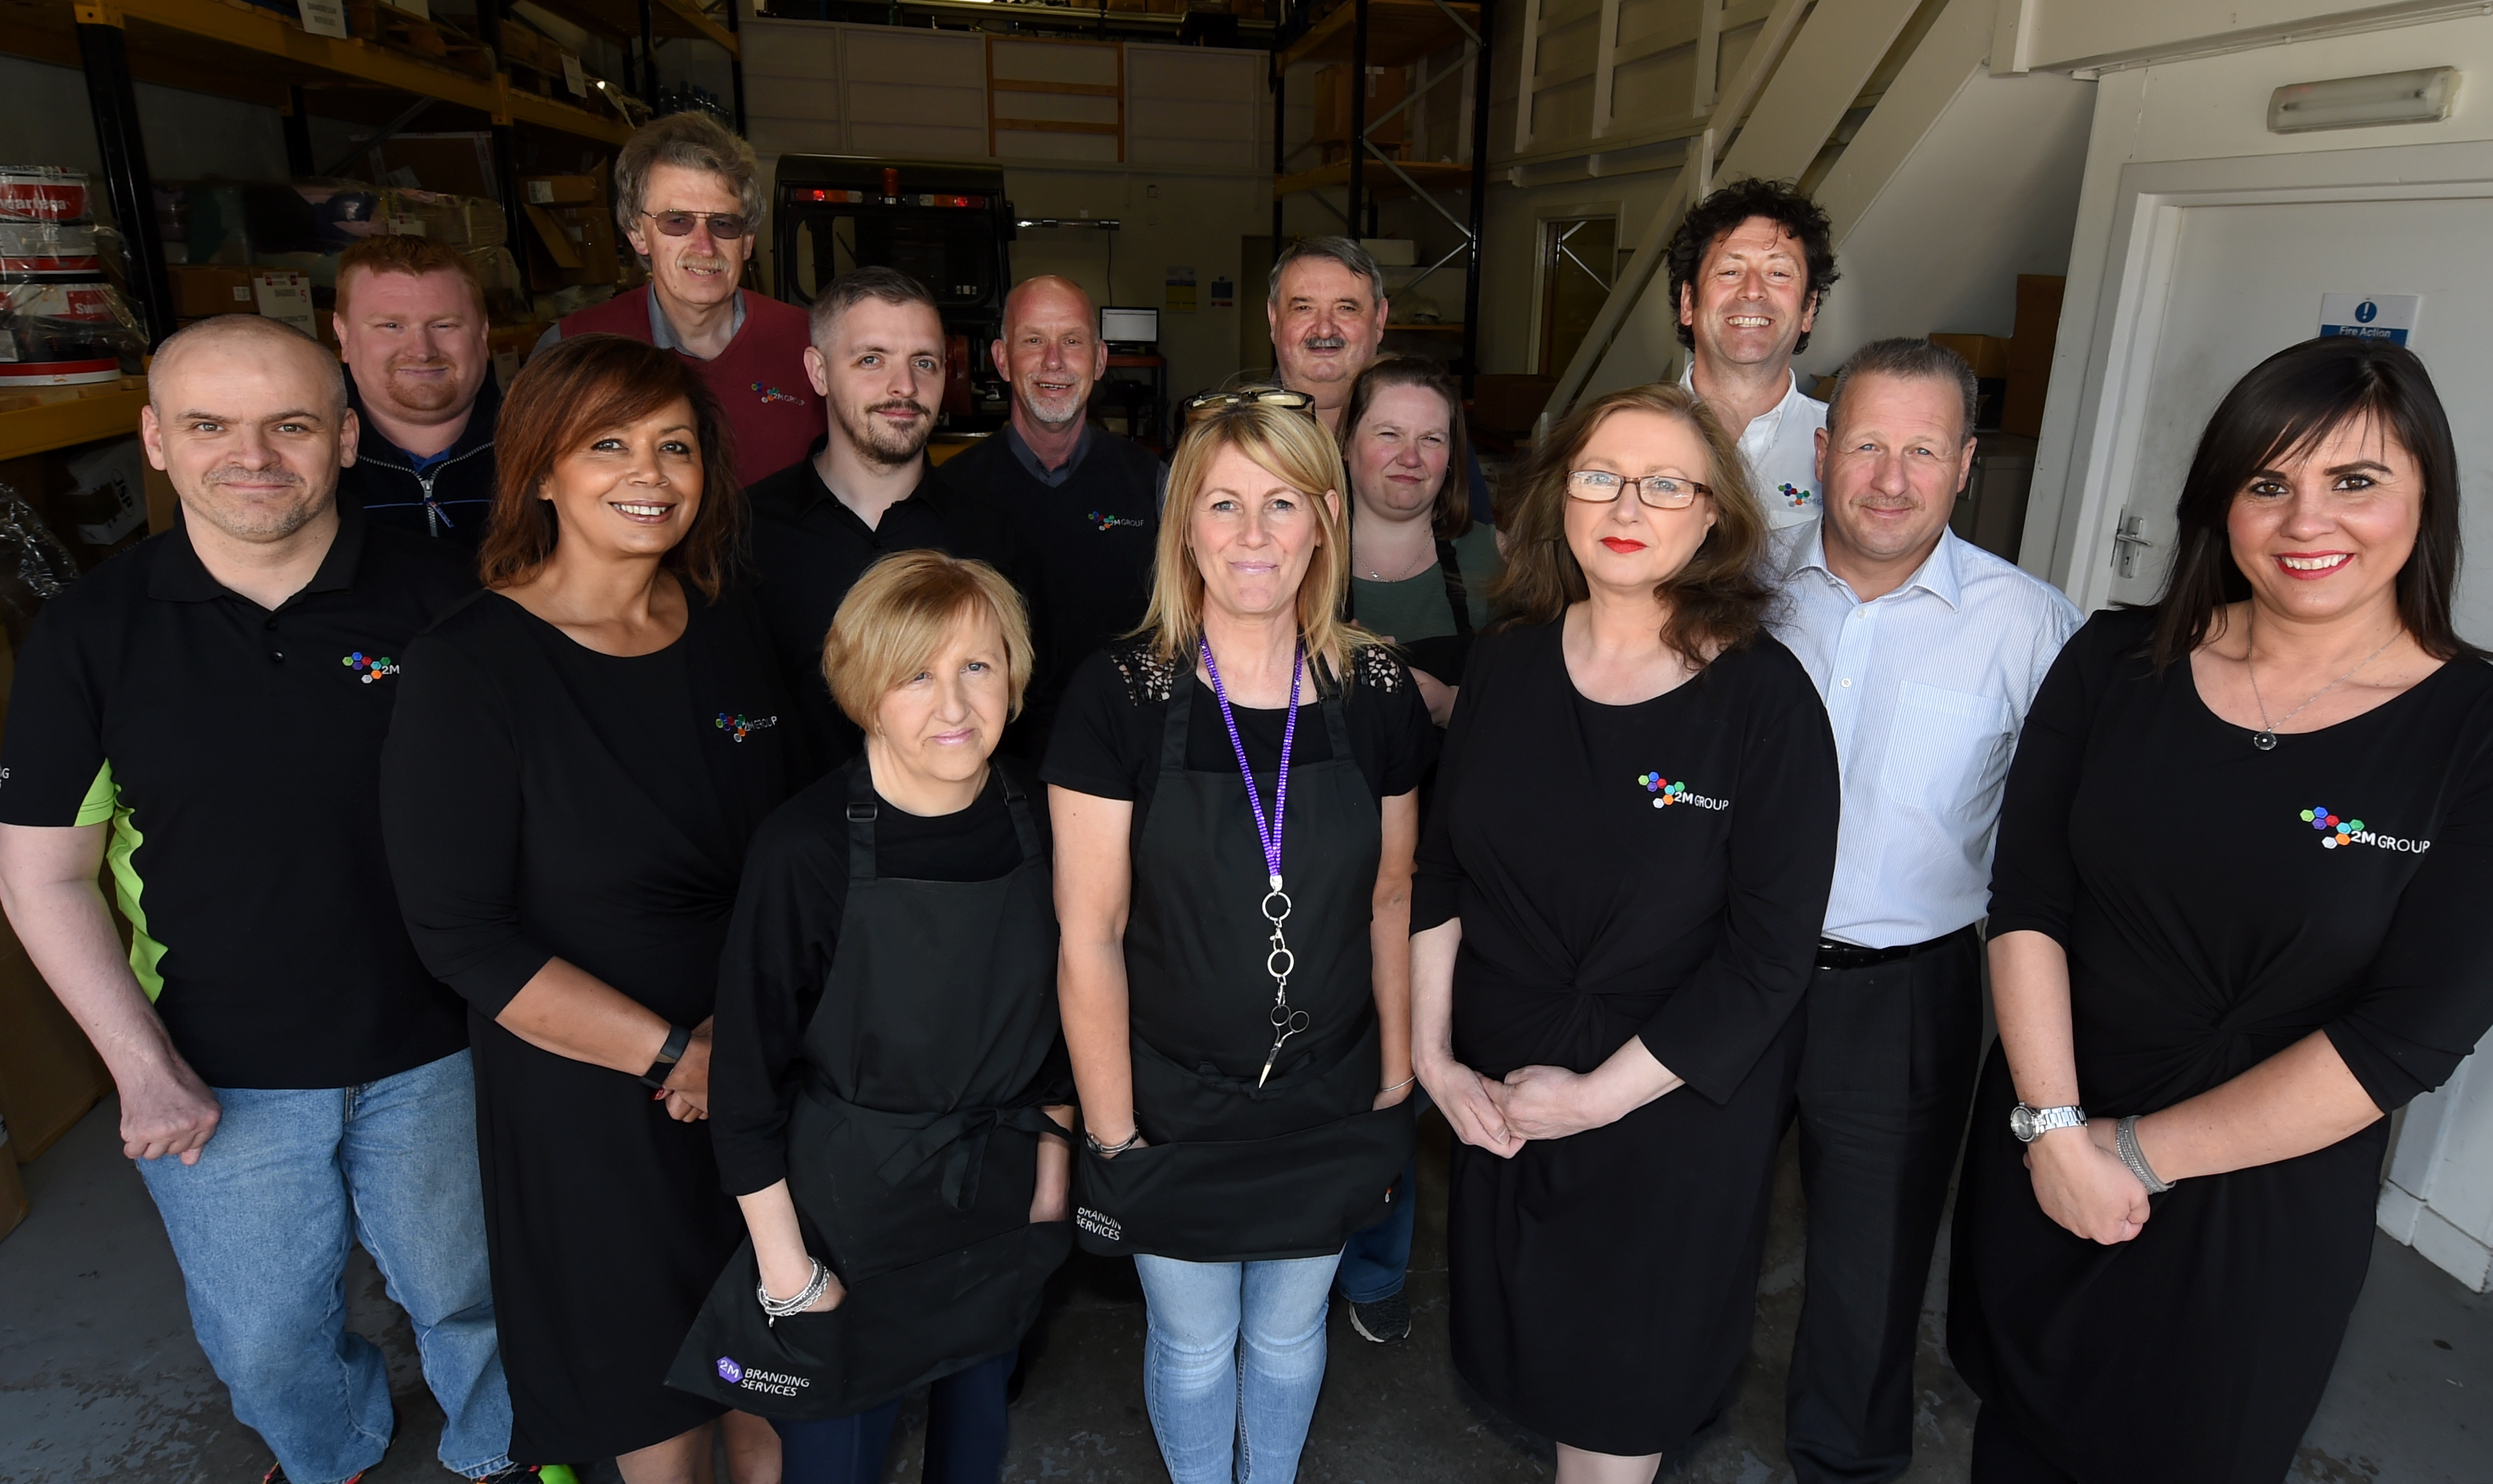 A photograph taken in May of 2M's Dyce based employees.